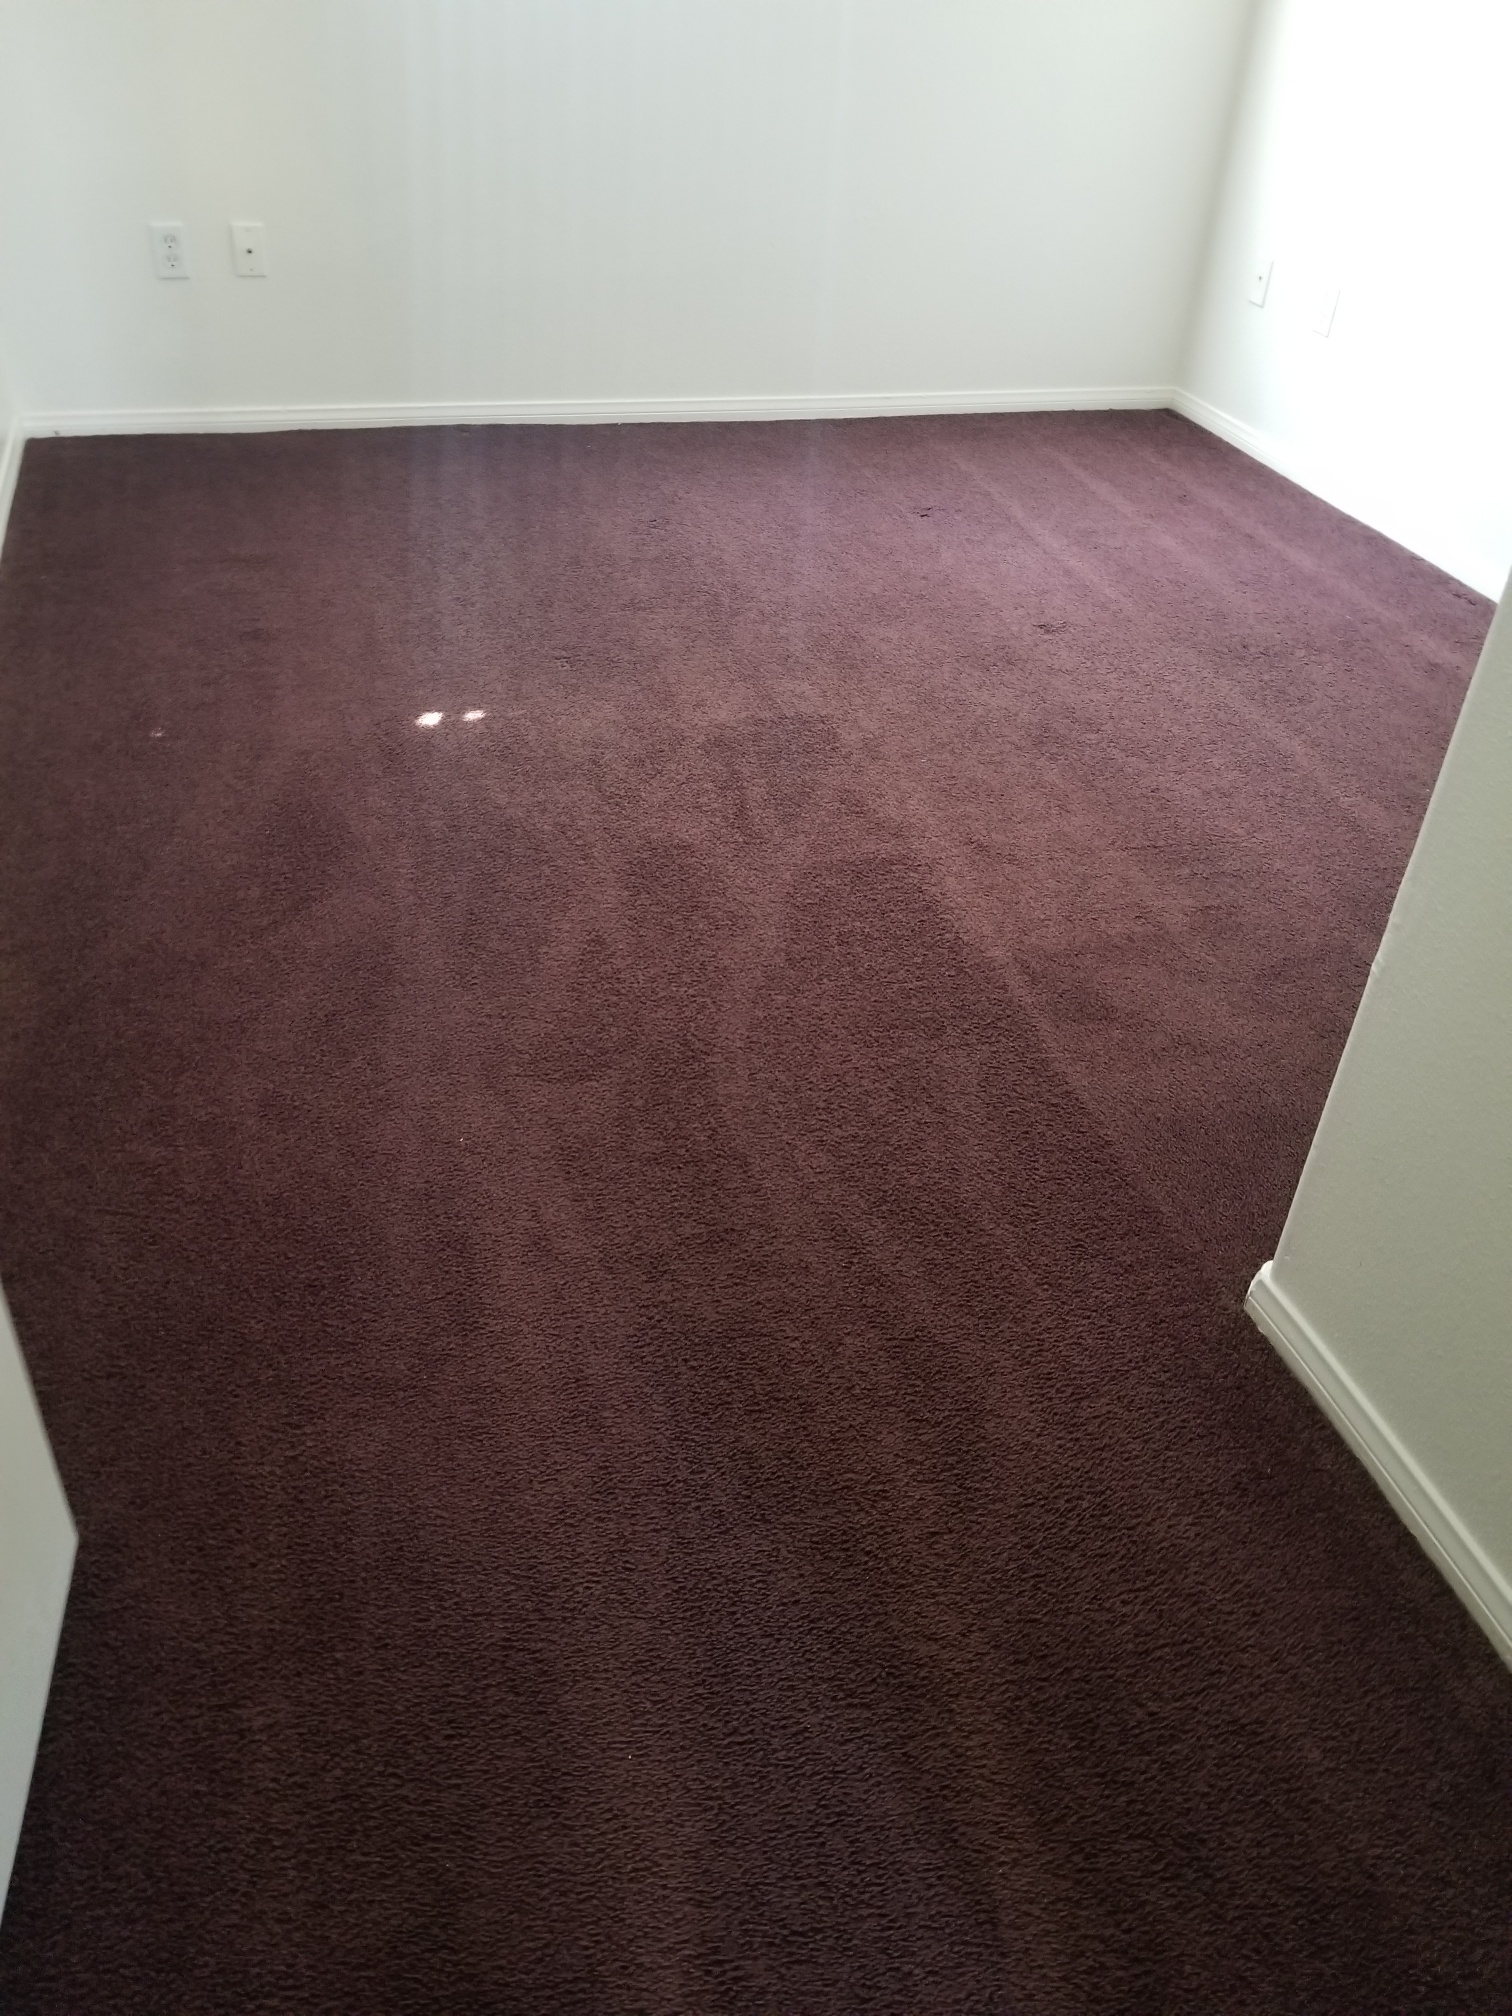 view of a bedroom at Willow Tree Village. Room has burgandy carpet.